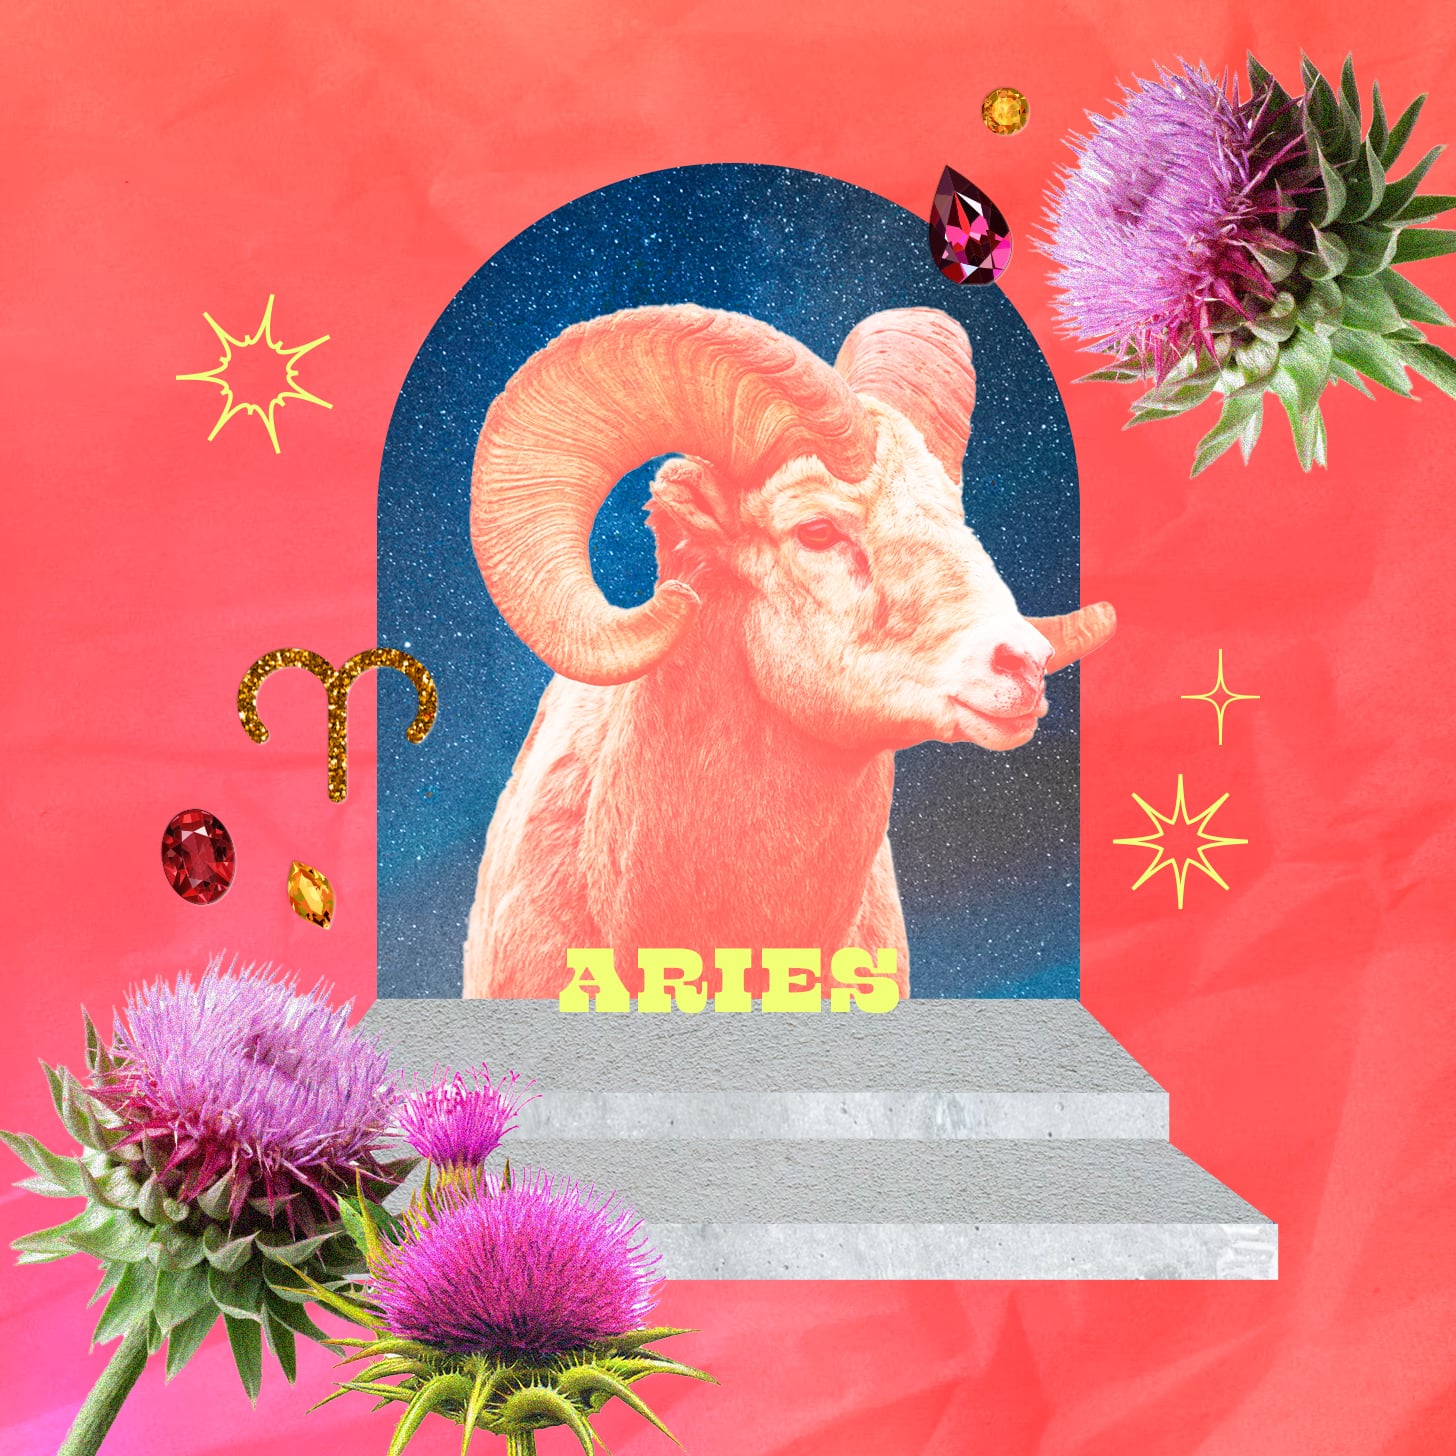 Aries weekly horoscope for July 31, 2022